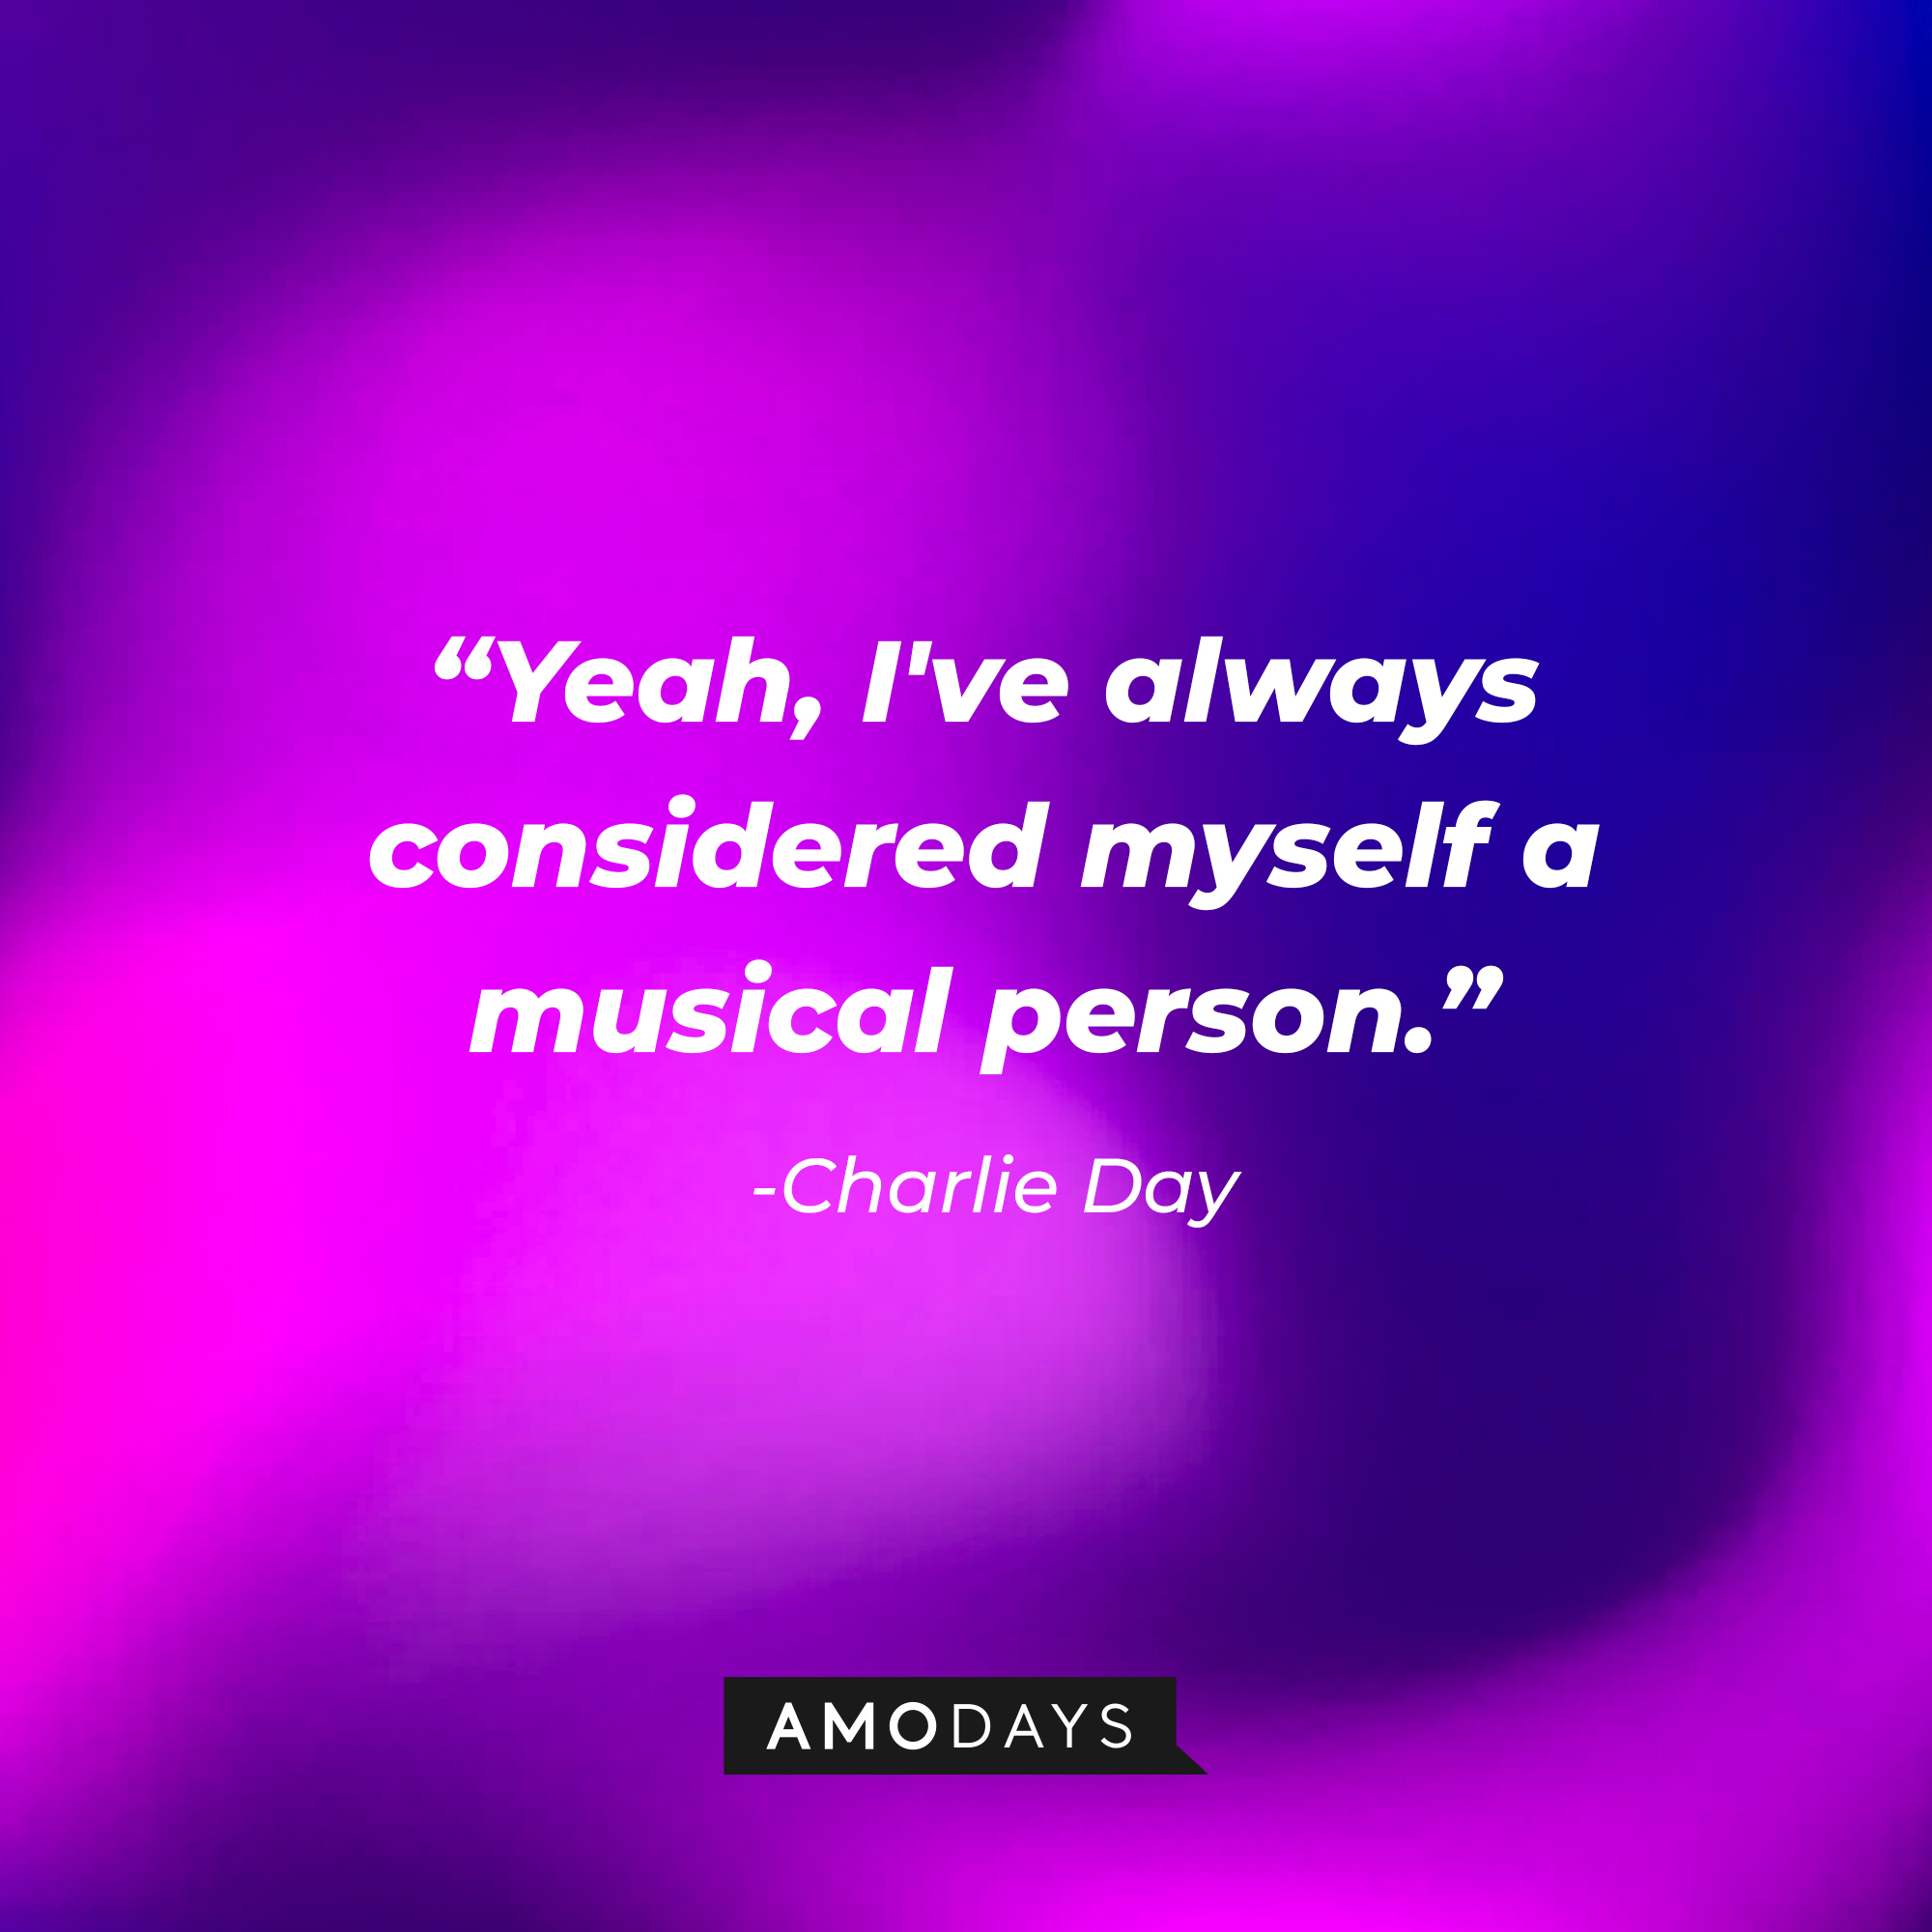 Charlie Day’s quote: “Yeah, I've always considered myself a musical person.” | Source: AmoDays